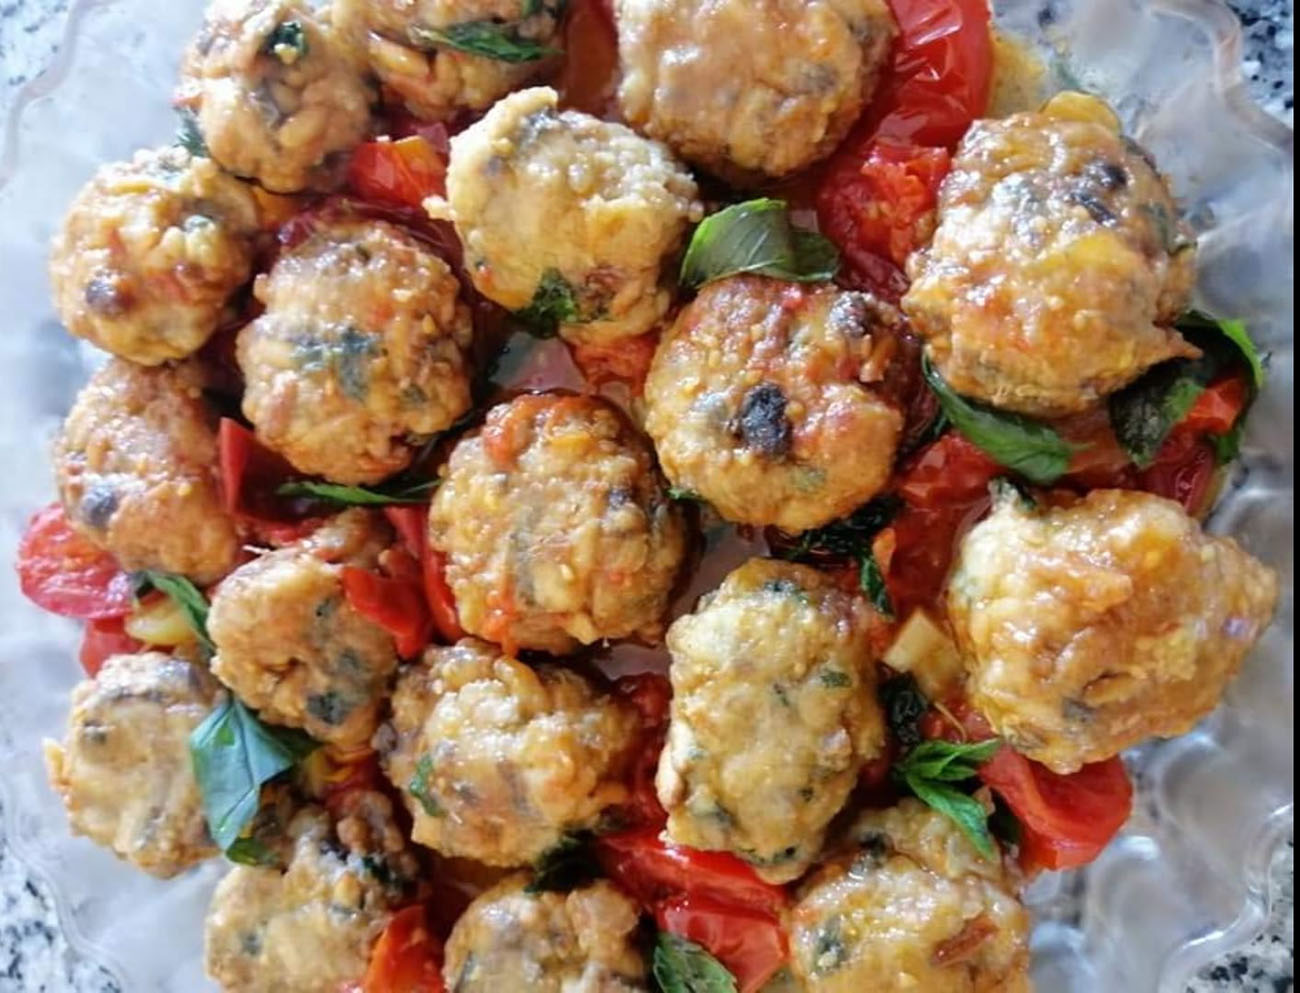 Sicilian-style anchovy meatballs